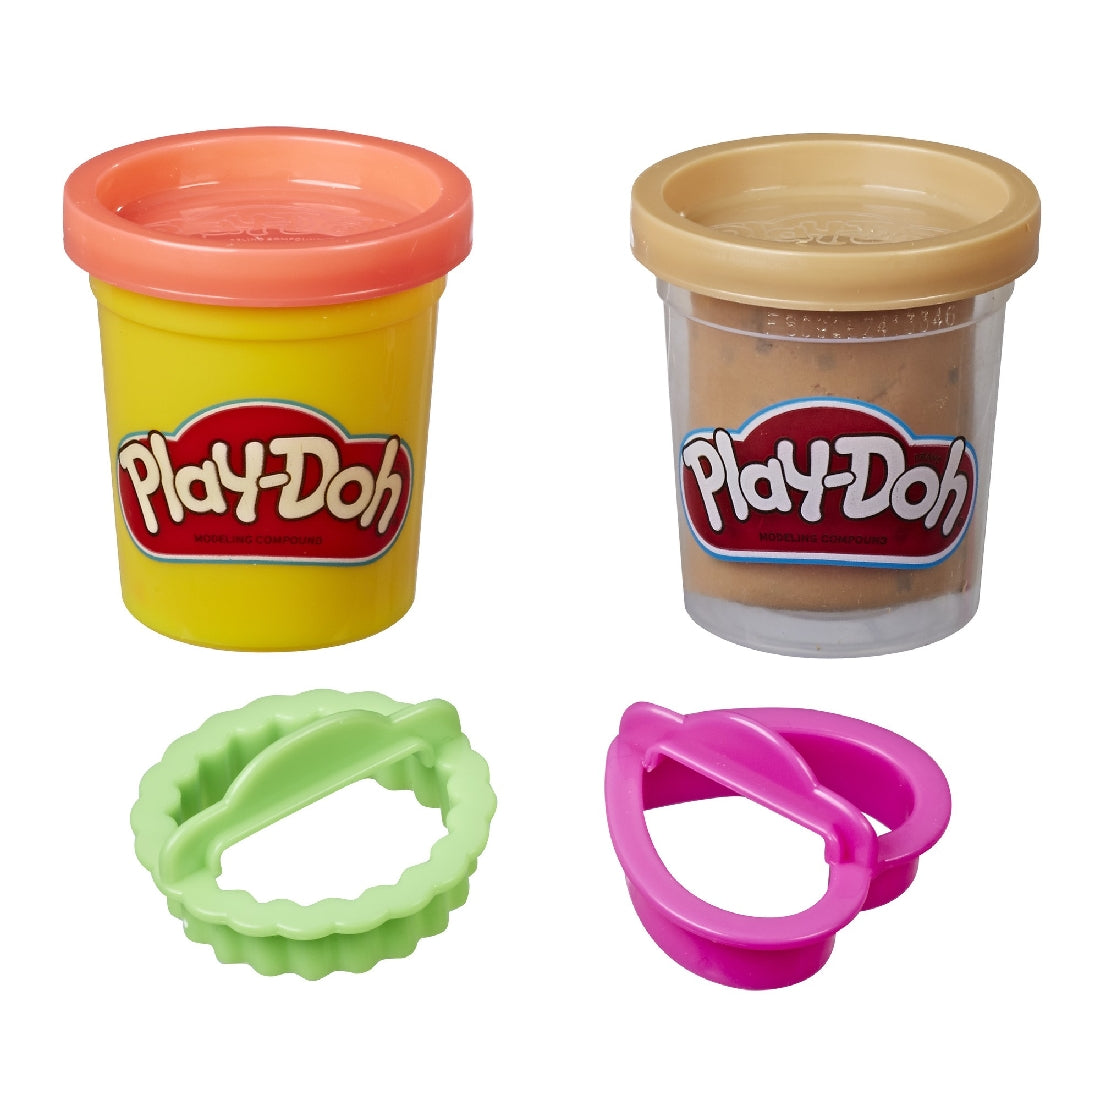 Play-Doh Chocolate Chip Cookie Canister Play Set 2 Cans (4 Oz)